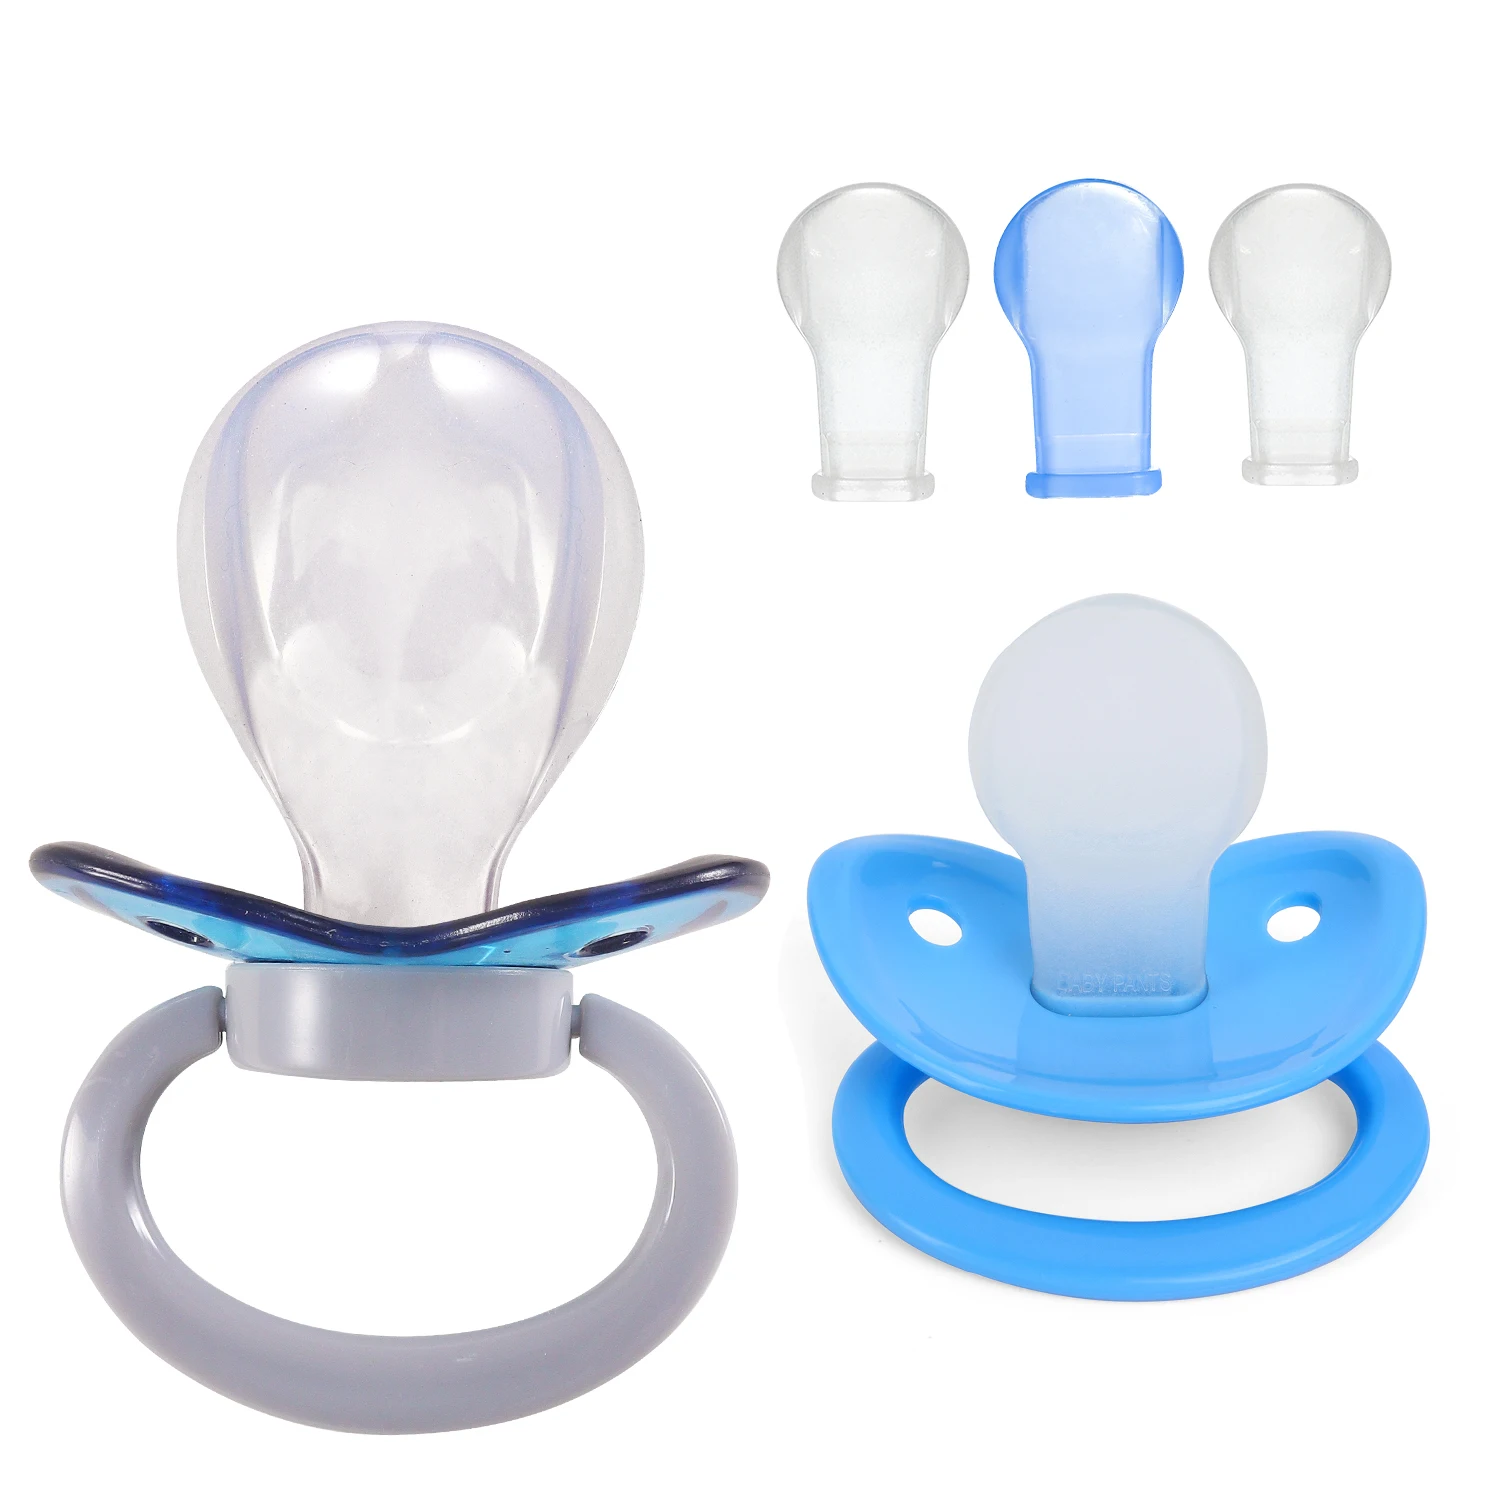 

2.5Inch Adult Sized Pacifier Variety 5 Pack Dummy for ABDL Large Shield